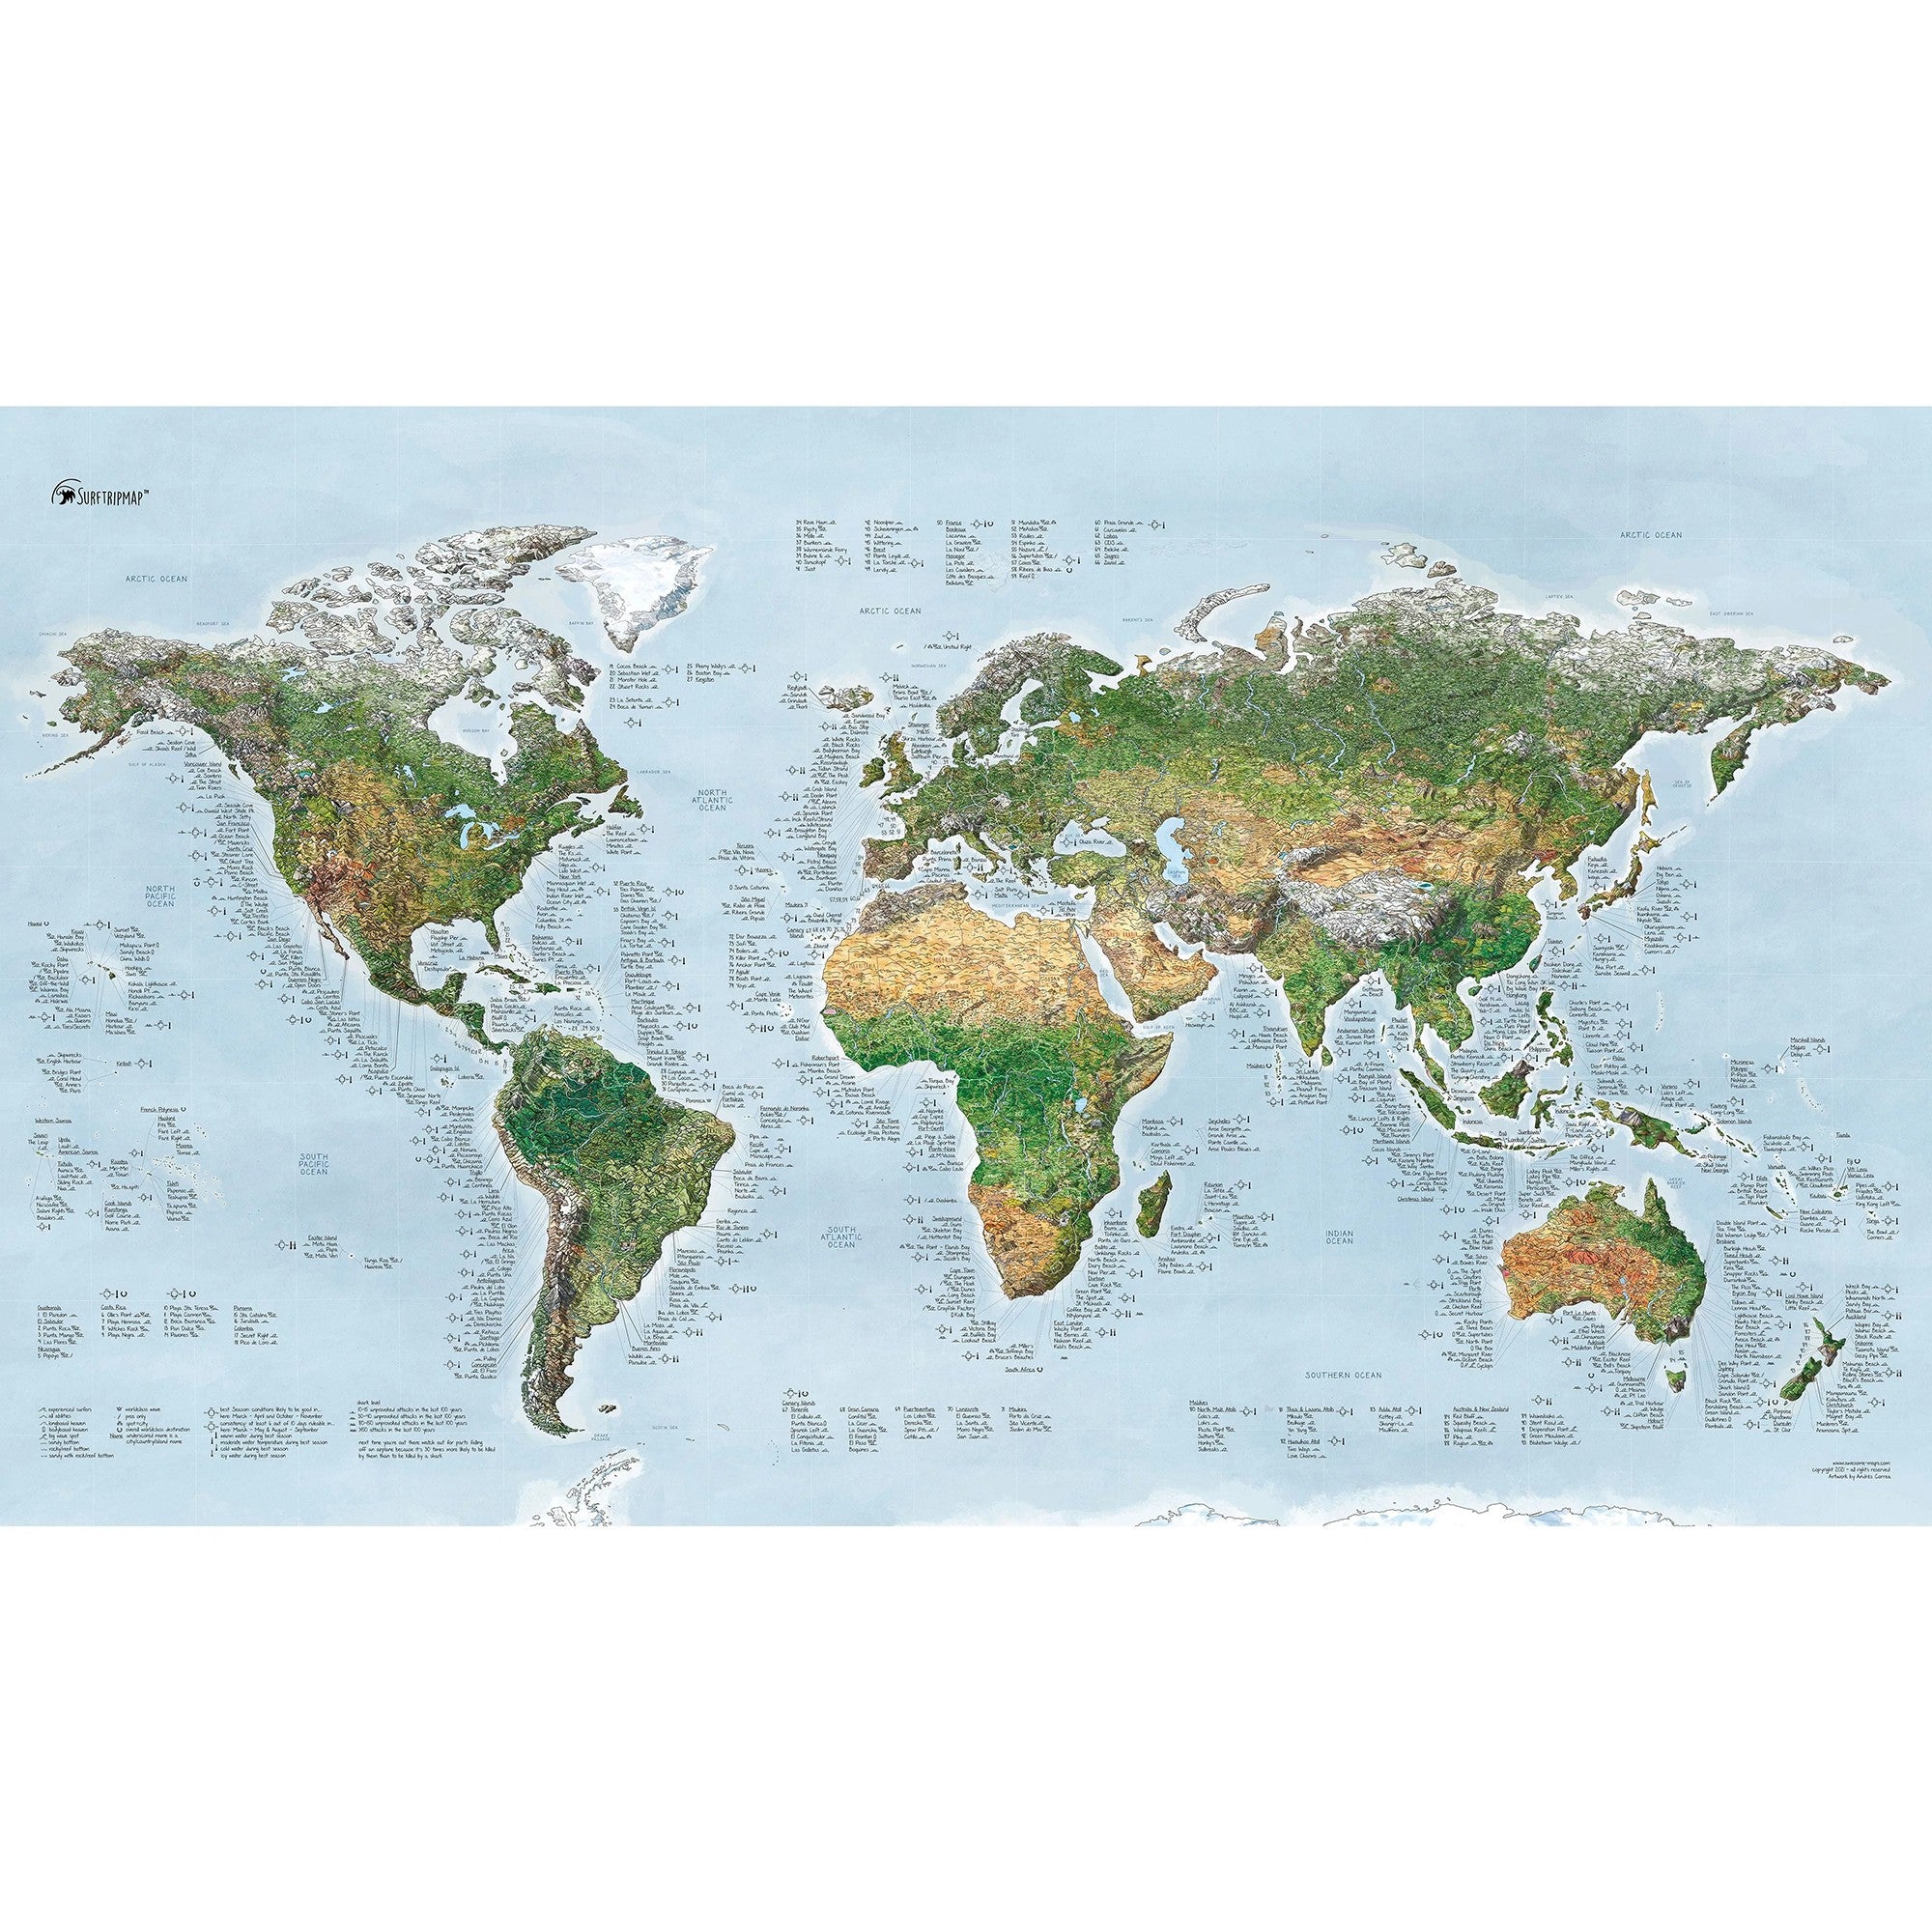 Awesome Maps - World Map Poster - Green Surf Trip